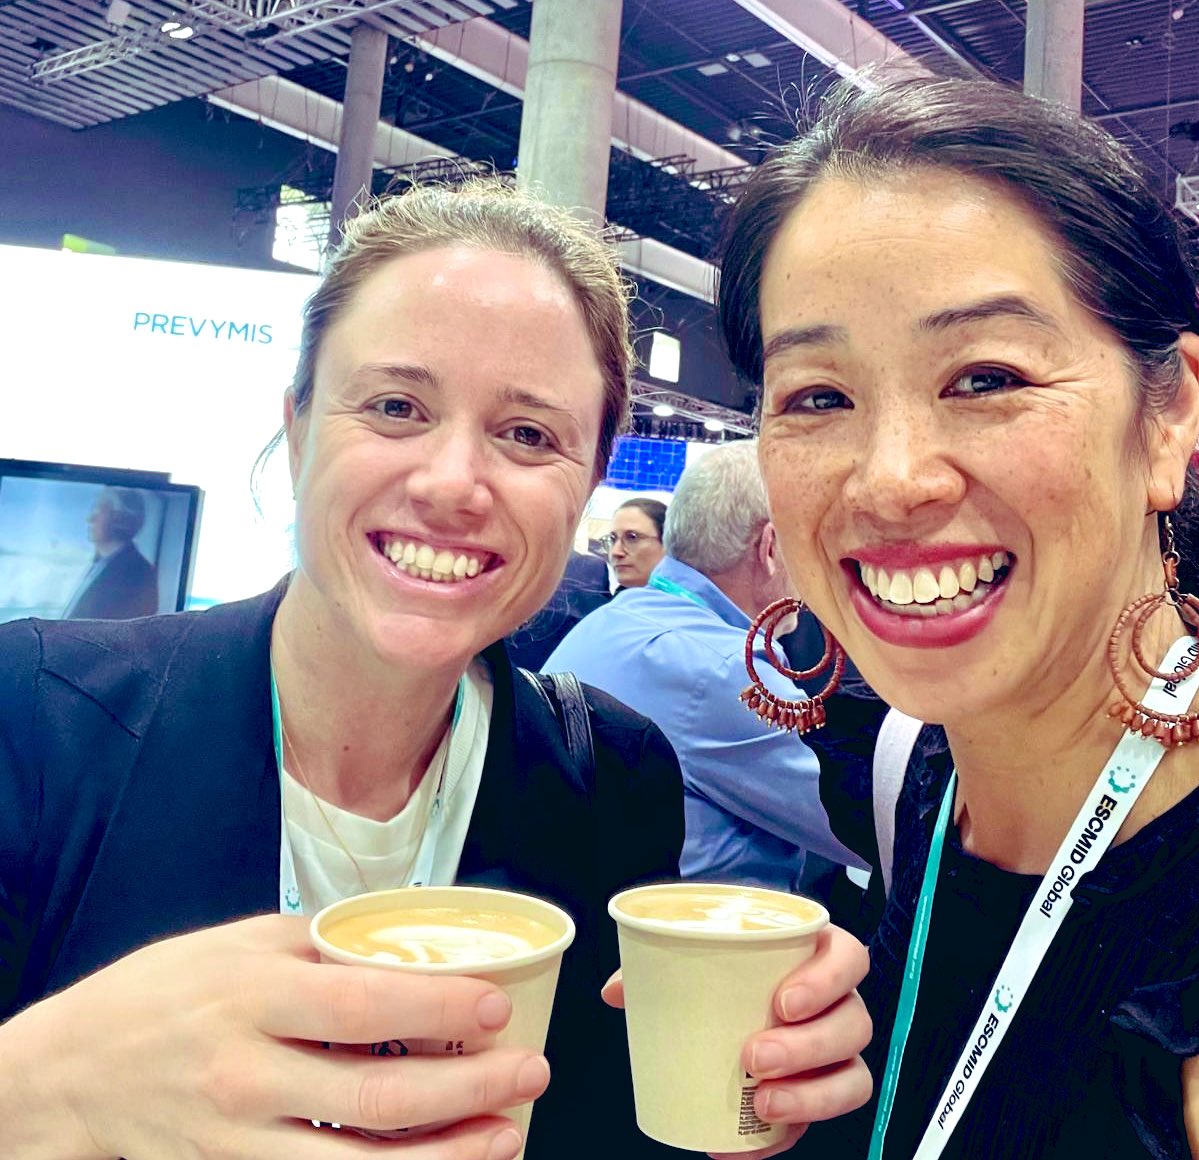 True Aussies 🇦🇺 sourcing out Melbourne roasted coffee ☕️ @ESCMID @NCICancer @michyong2